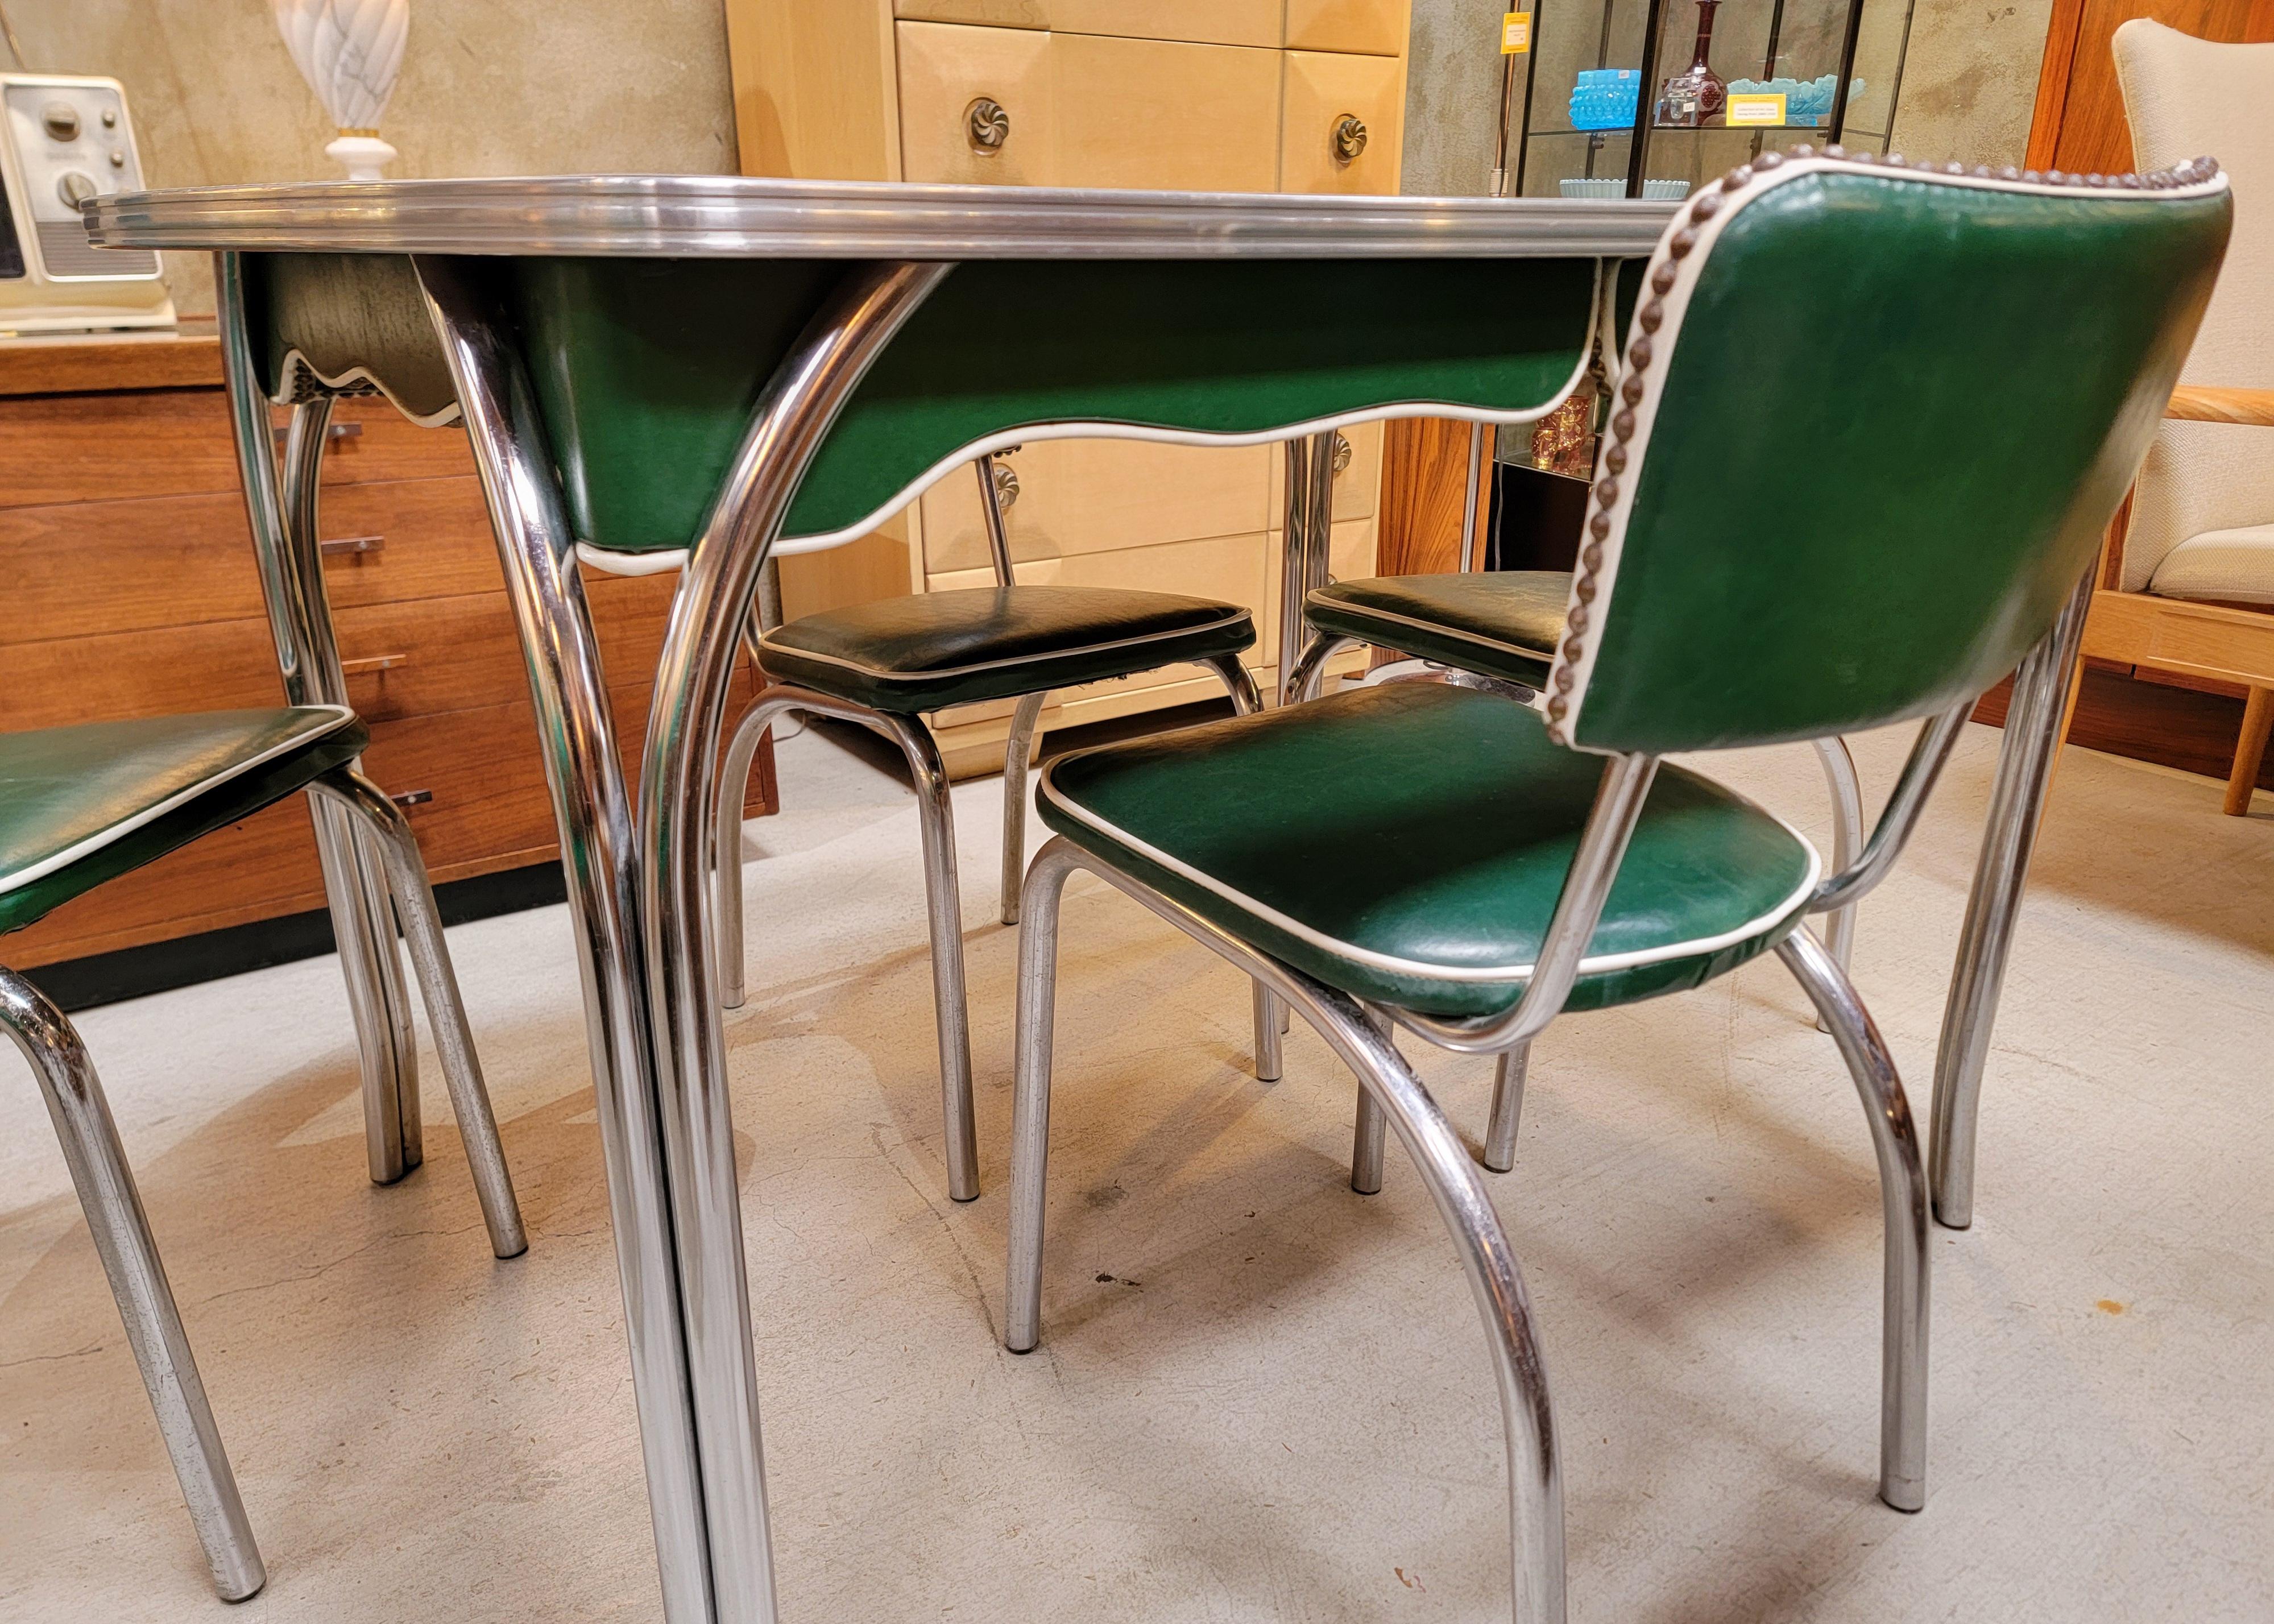 Five piece green  marbleized formica & polished chrome dinette set consisting of dining table and four matching dining chairs. Circa. 1950.s Exceptional original condition with very mild wear from use. Original Naugahyde upholstery. There is not a